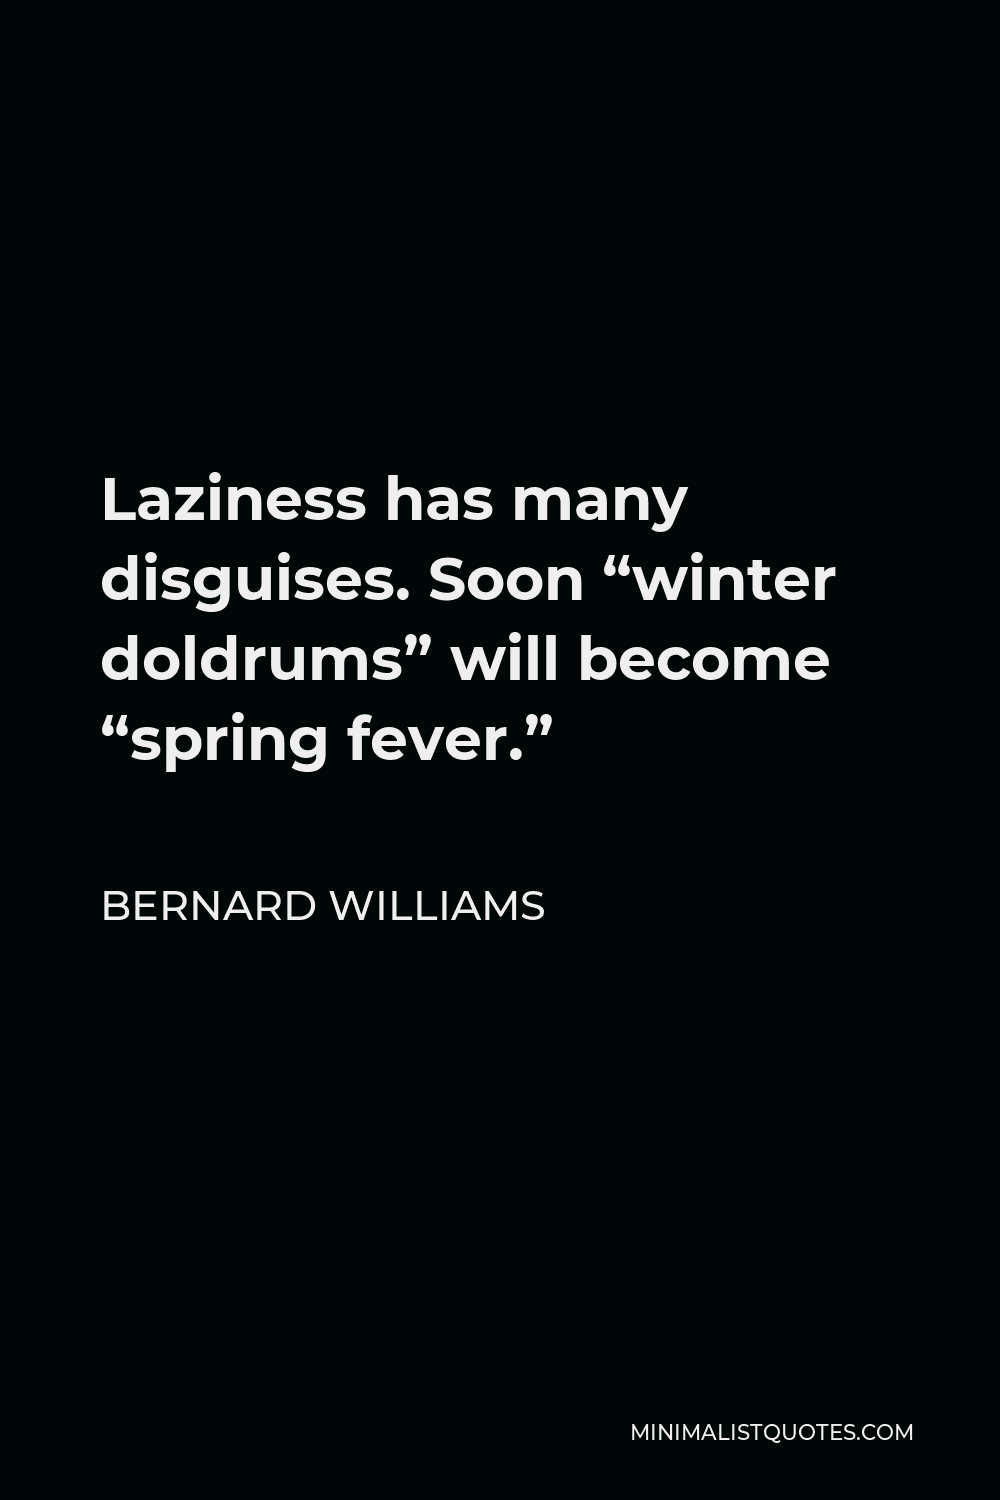 Bernard Williams Quote - Laziness has many disguises. Soon “winter doldrums” will become “spring fever.”